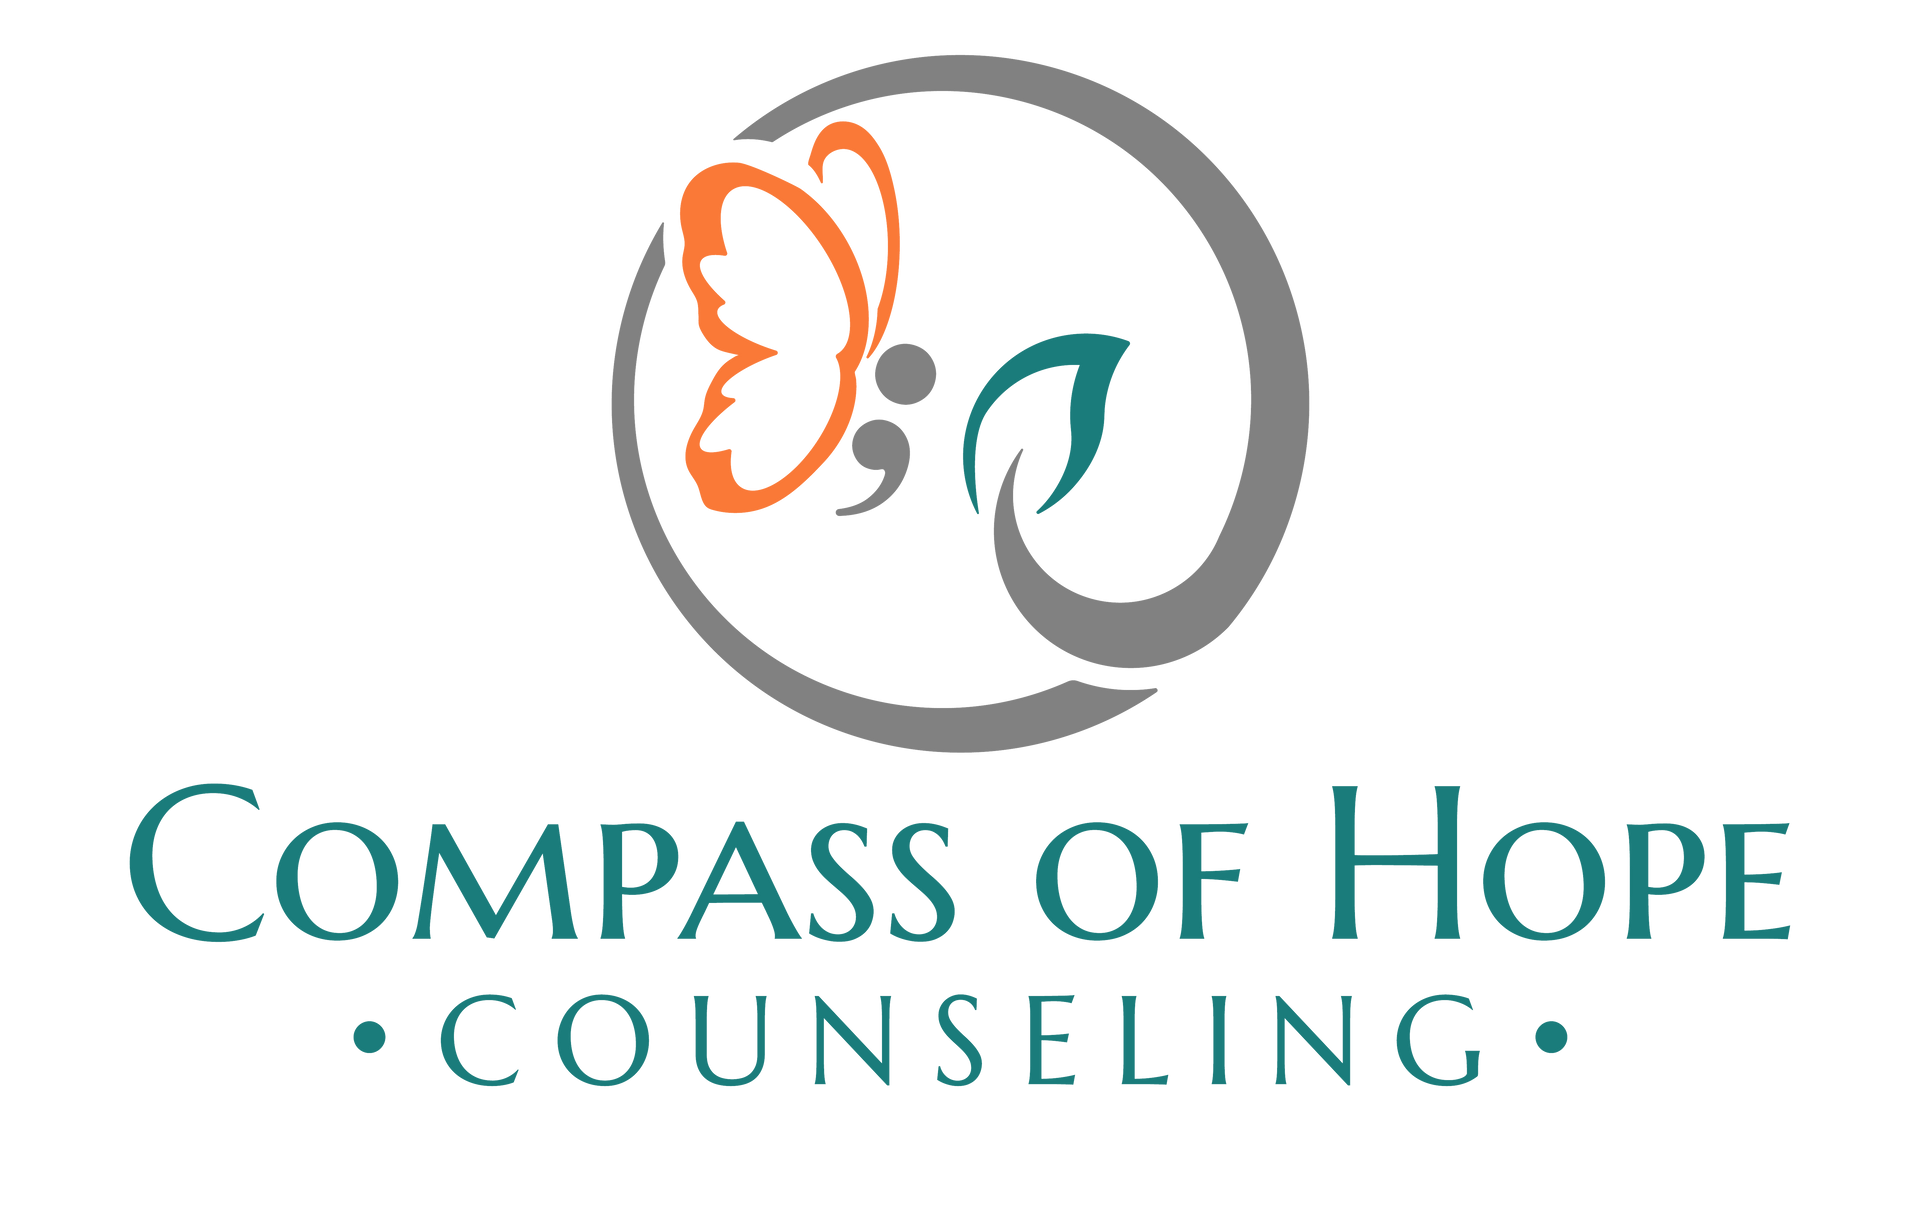 The logo for compass of hope counseling shows a butterfly in a circle.